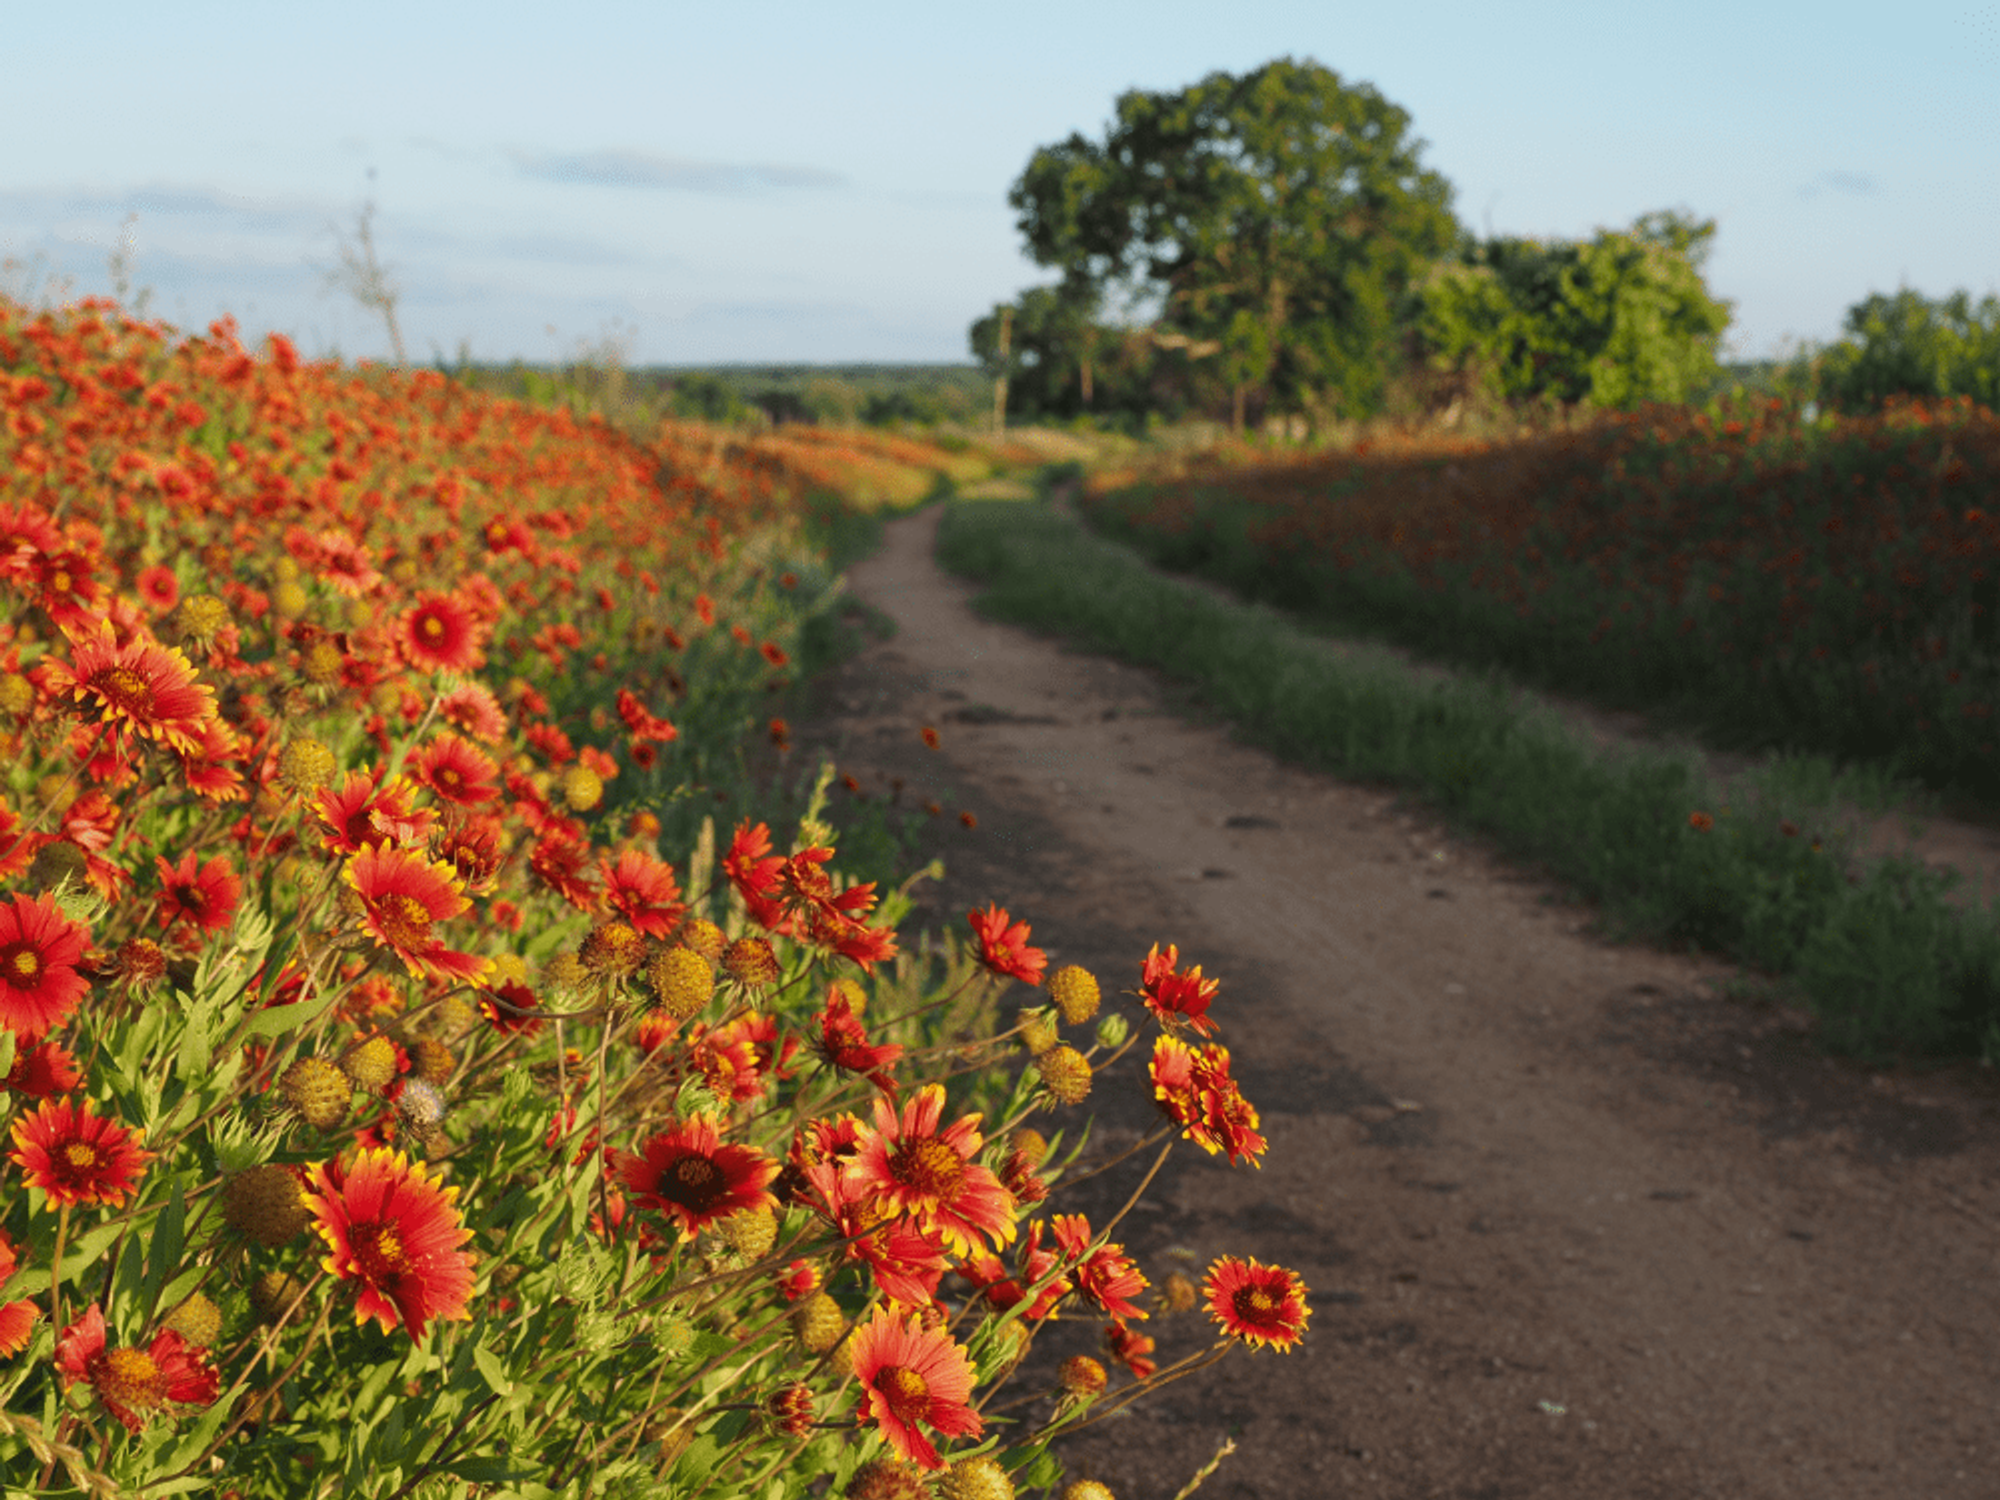 Take time to enjoy the Hill Country's natural beauty.